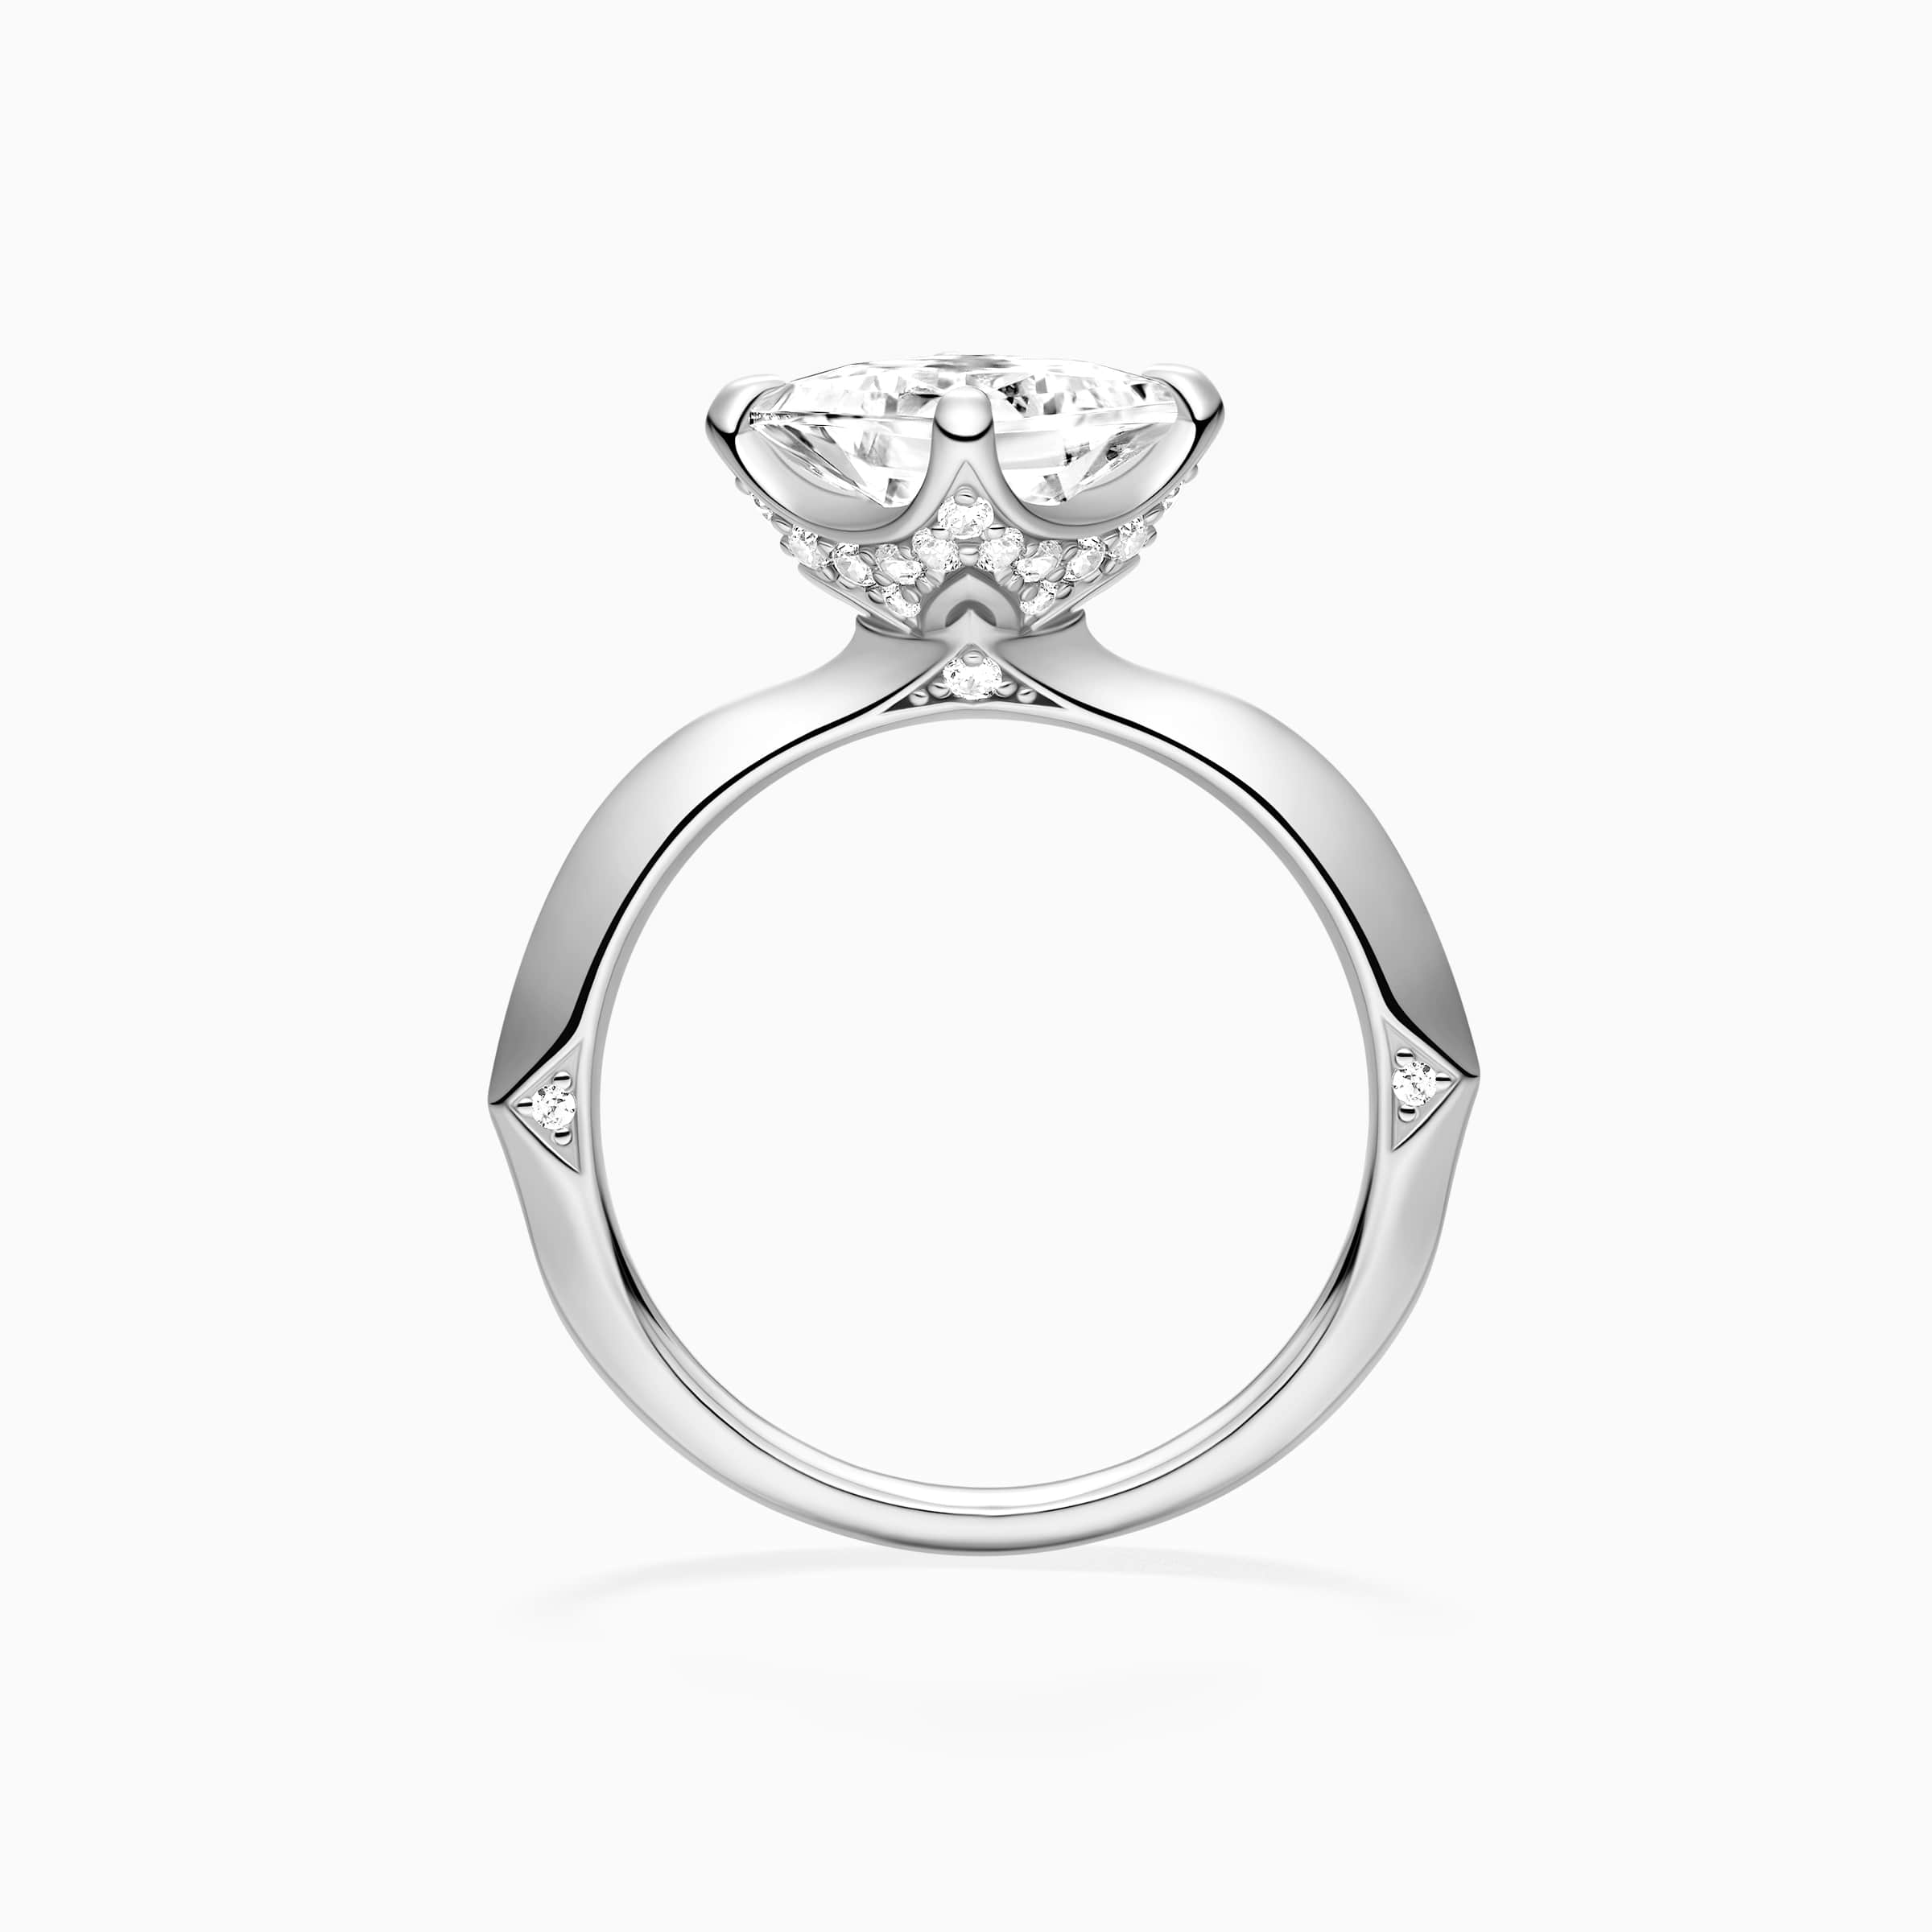 Darry Ring solitaire princess cut engagement ring front view